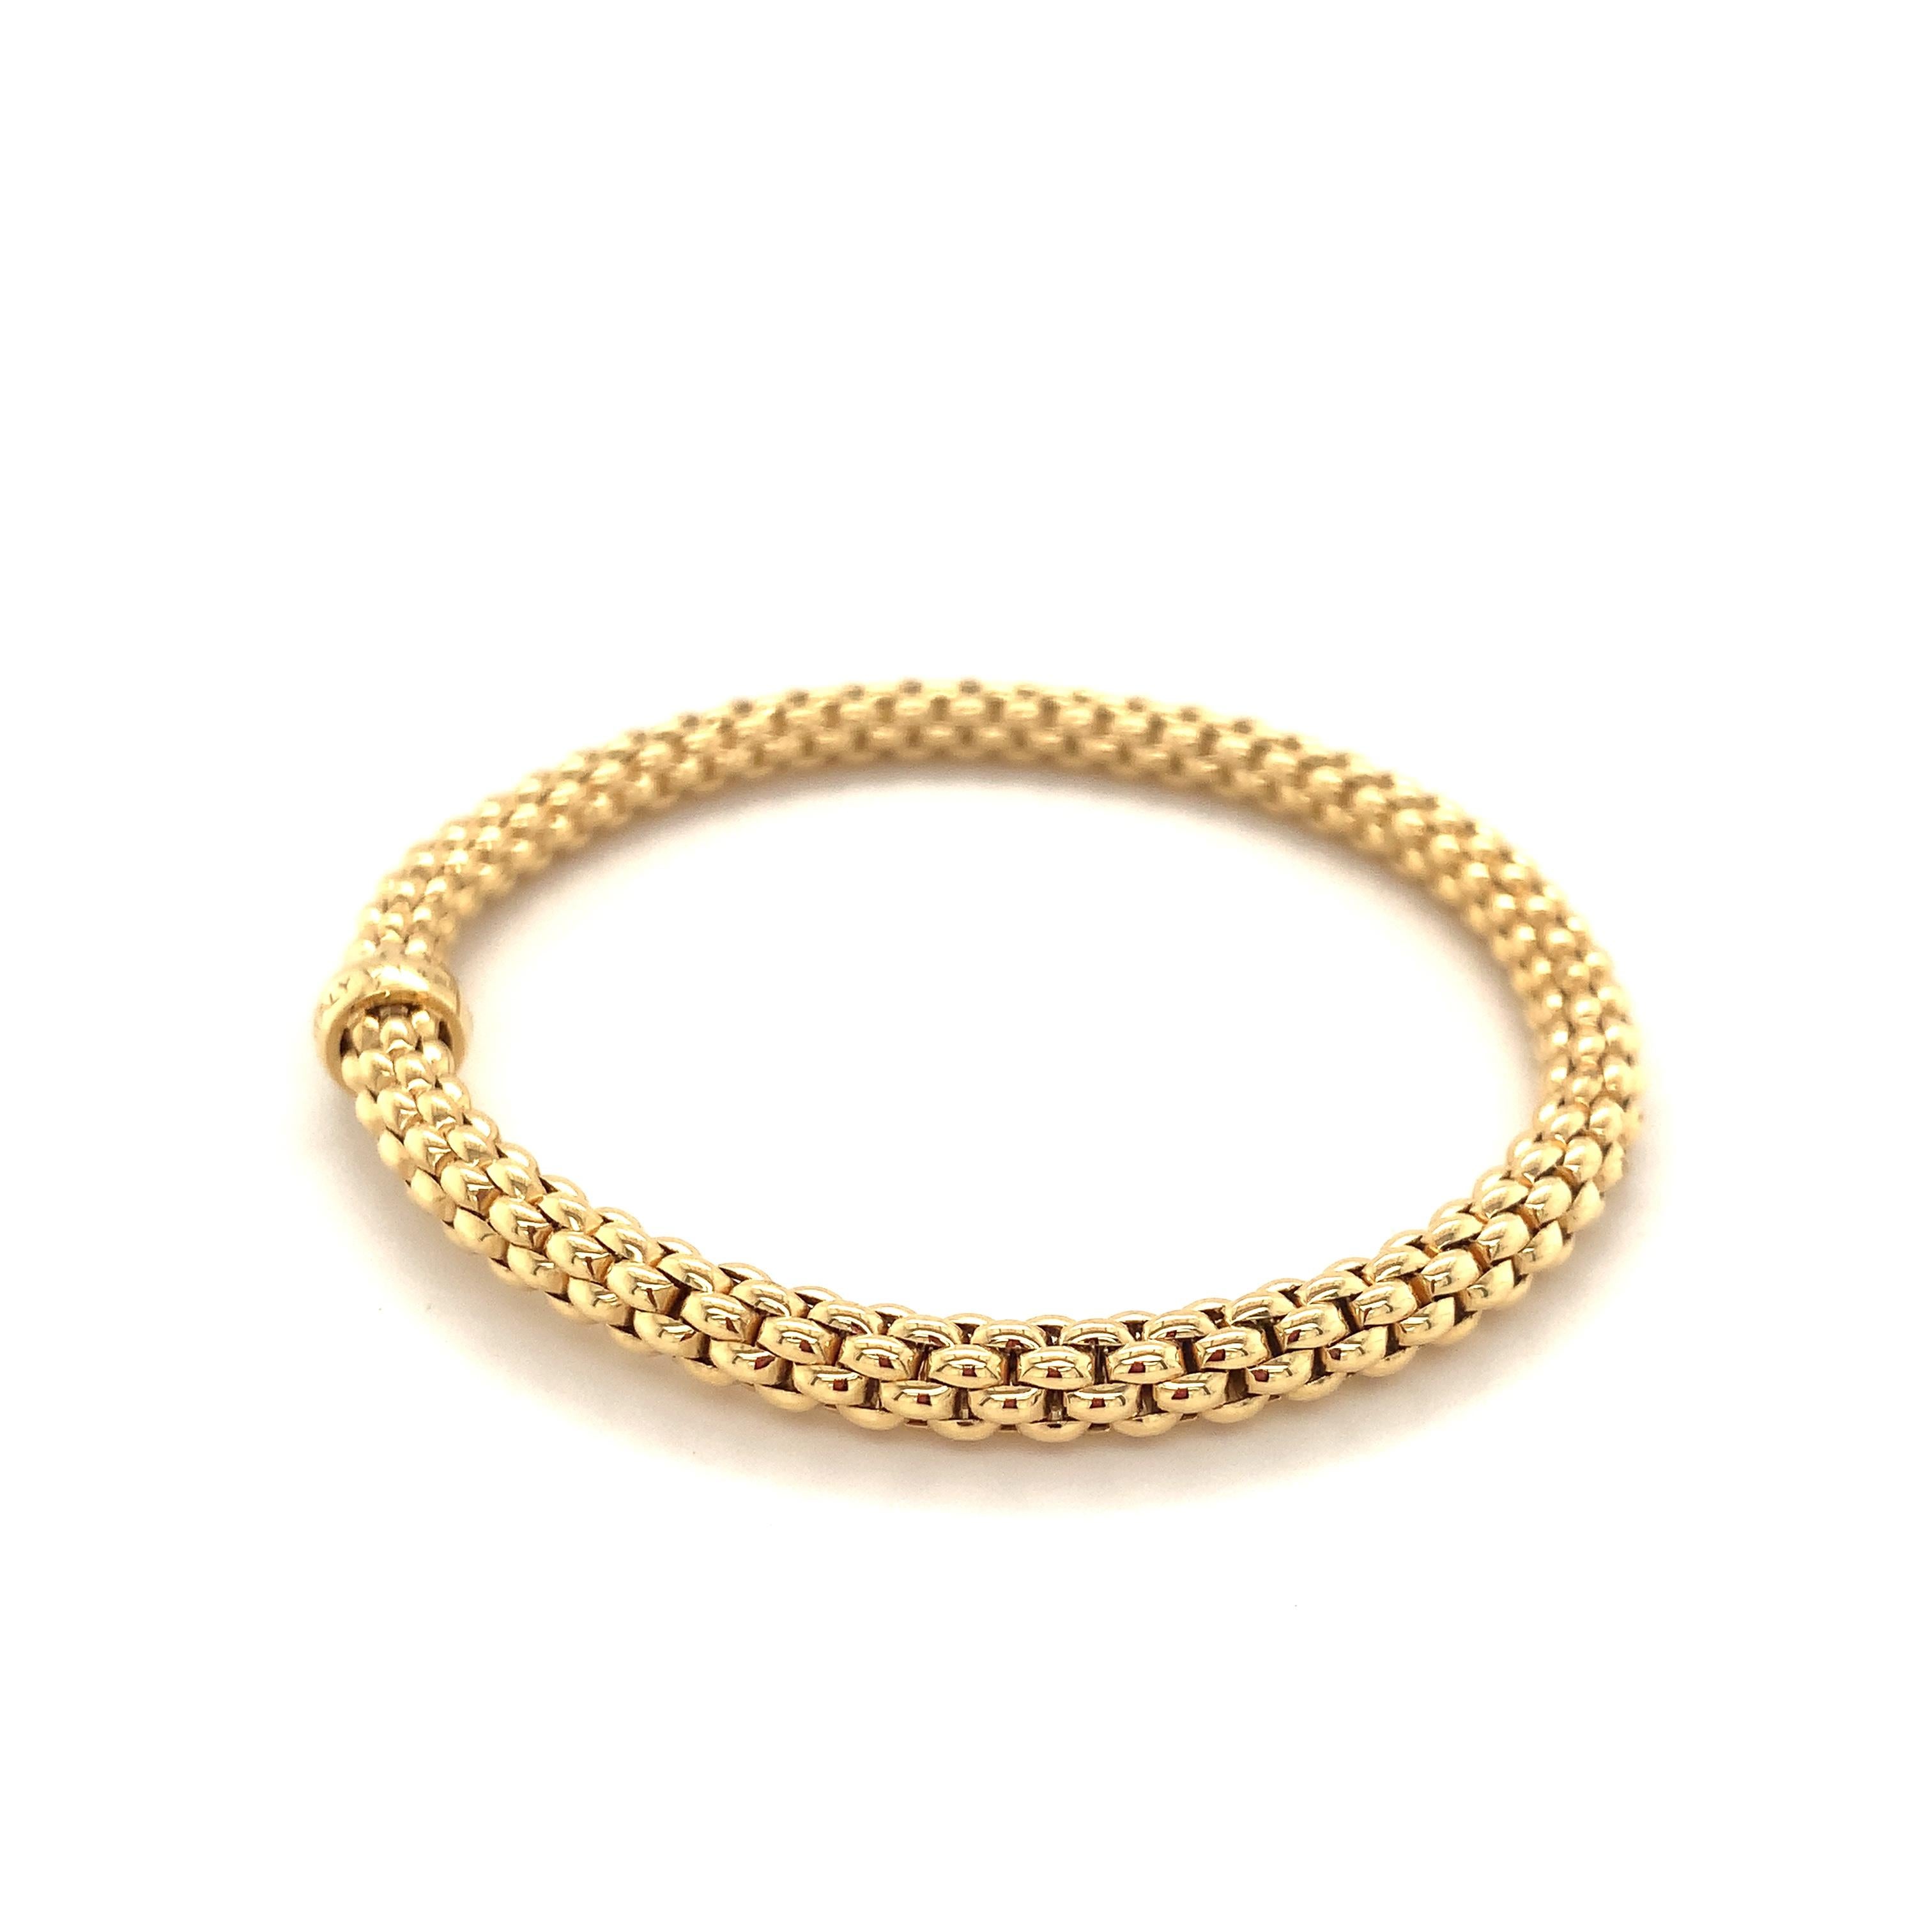 Fope Bracelet 18K Yellow Gold with Solid Gold Rondel 620BM-G 1